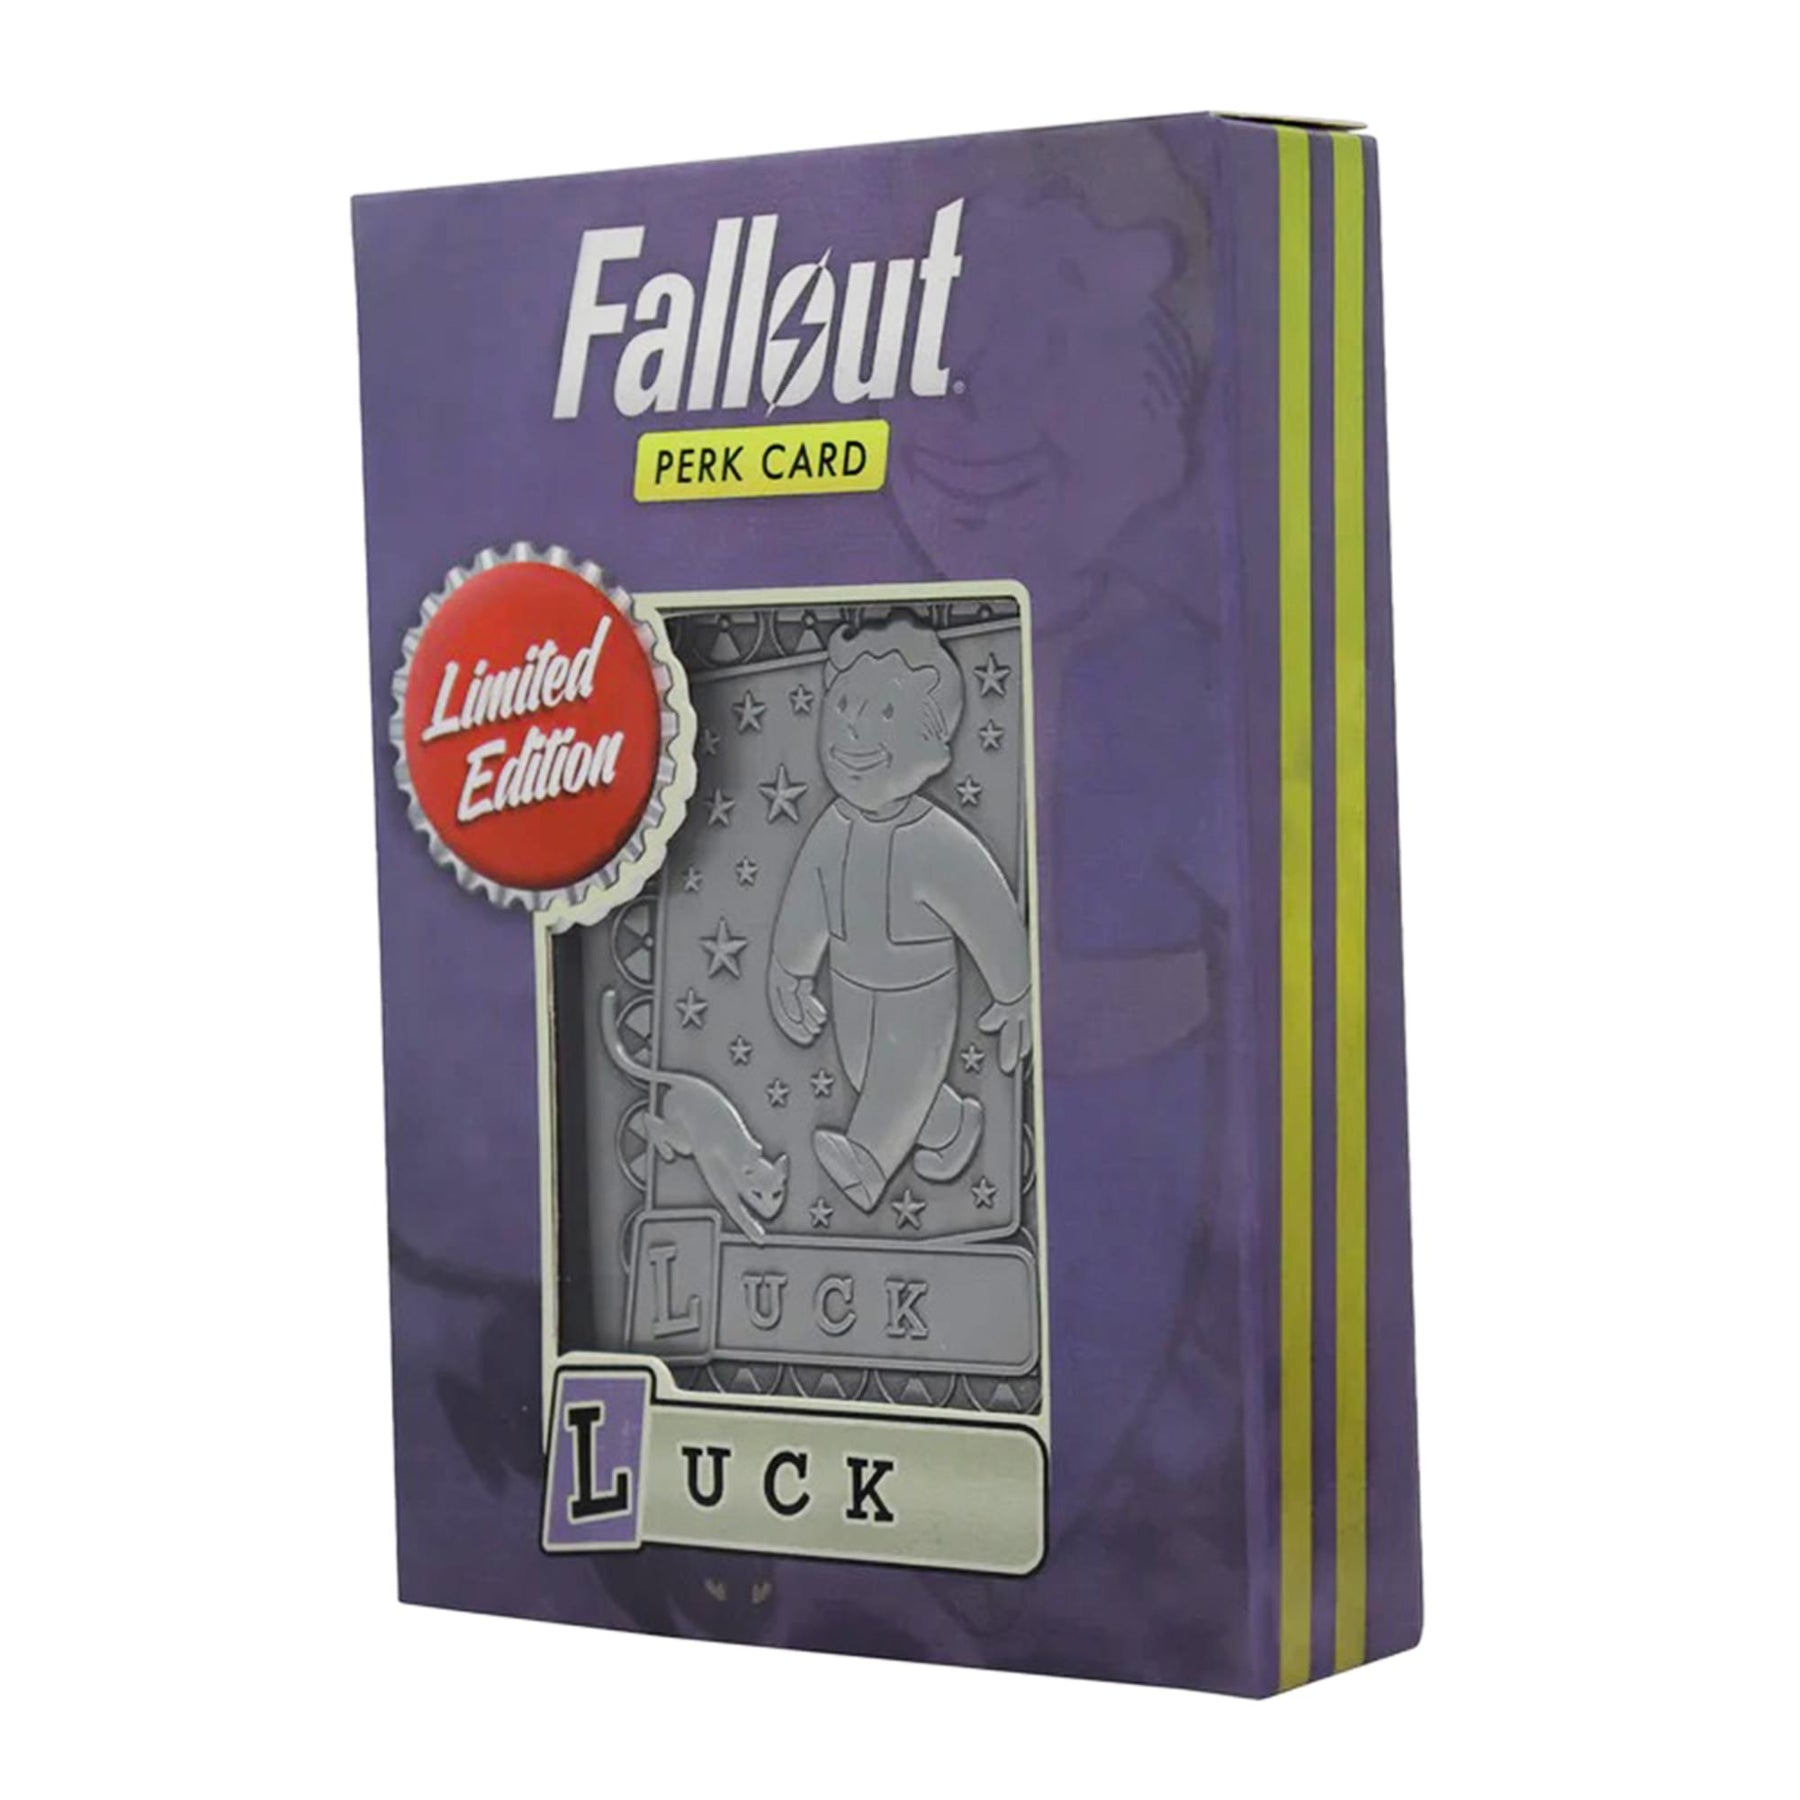 Fallout Limited Edition Replica Perk Card | Luck